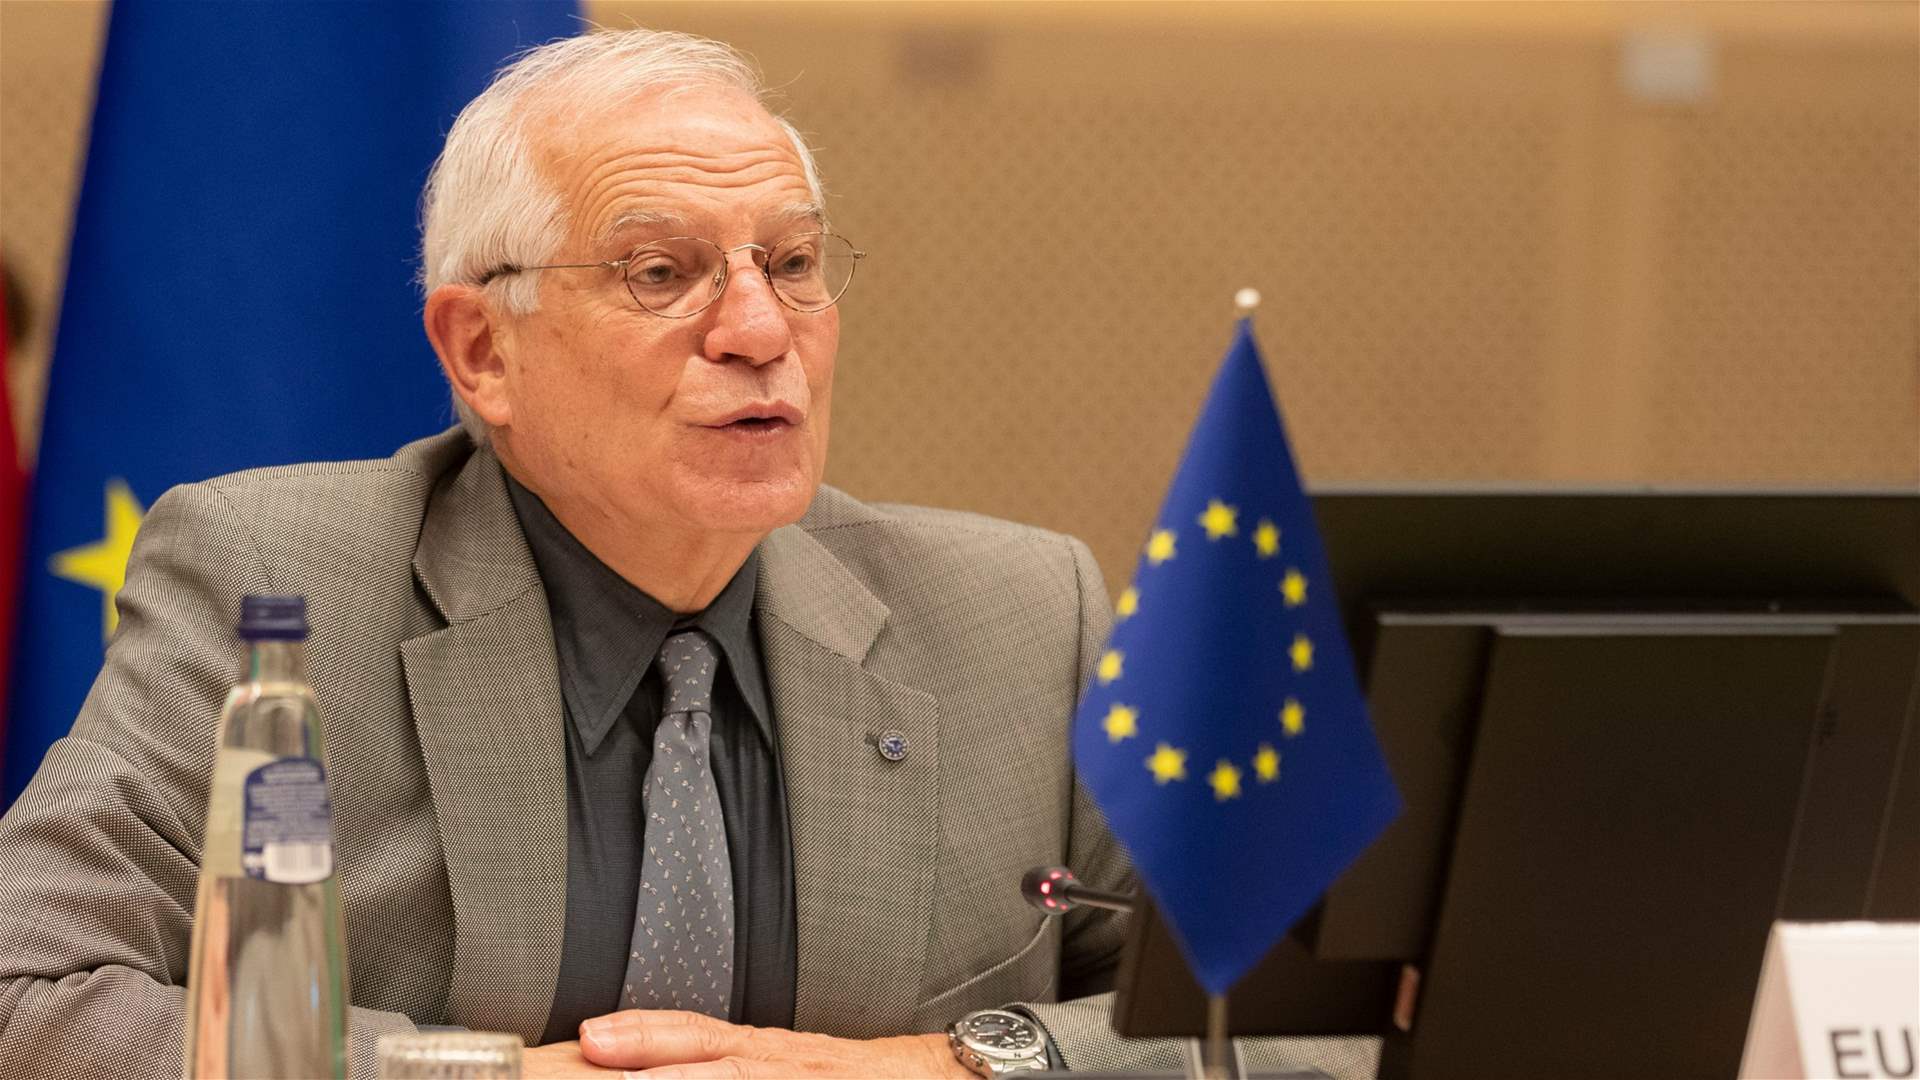 EU&#39;s Borell urges action on hostage release agreement and humanitarian ceasefire in Gaza